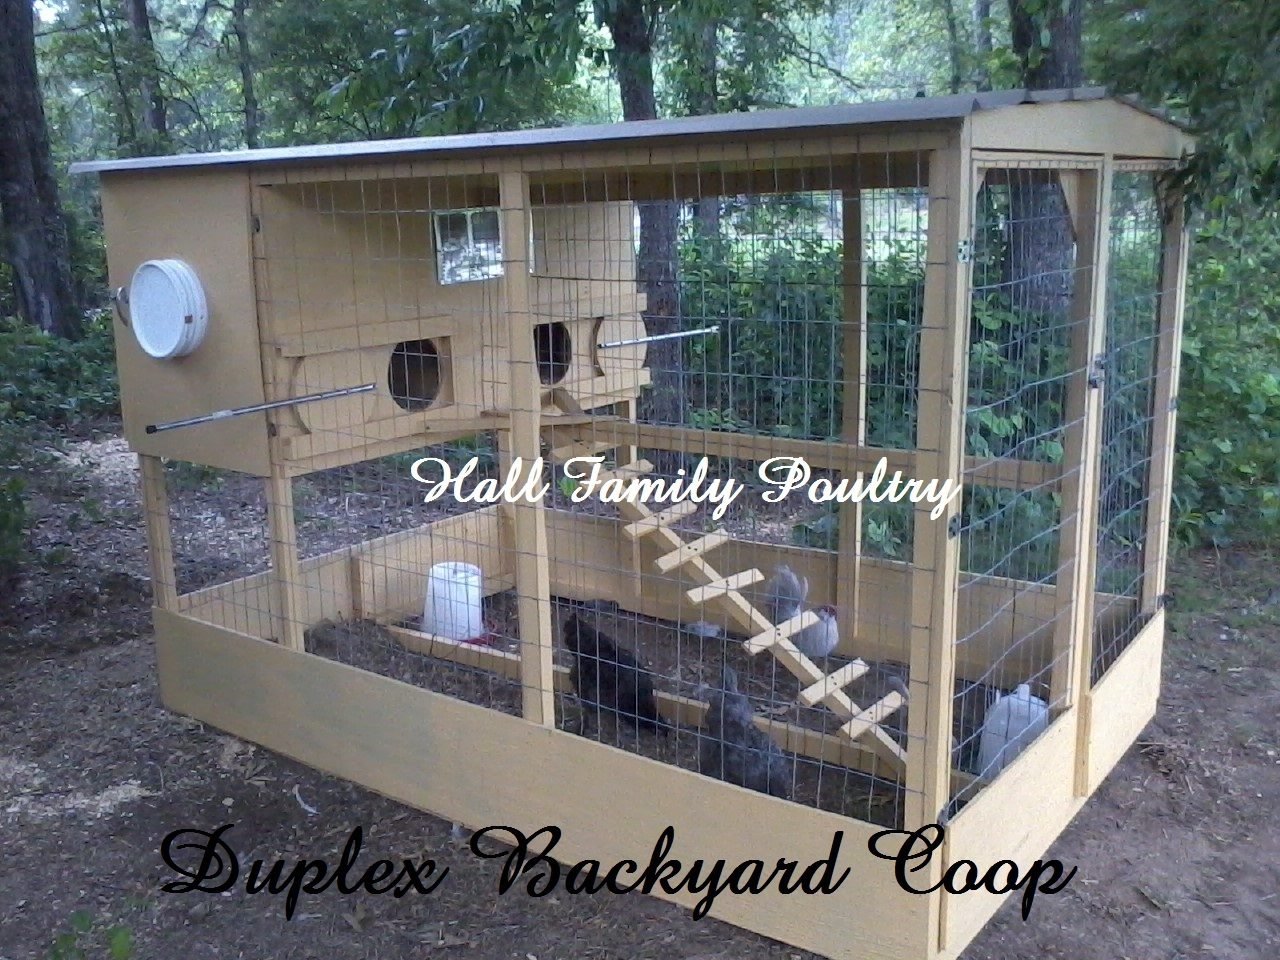 For Sale: Backyard Coop and Plans